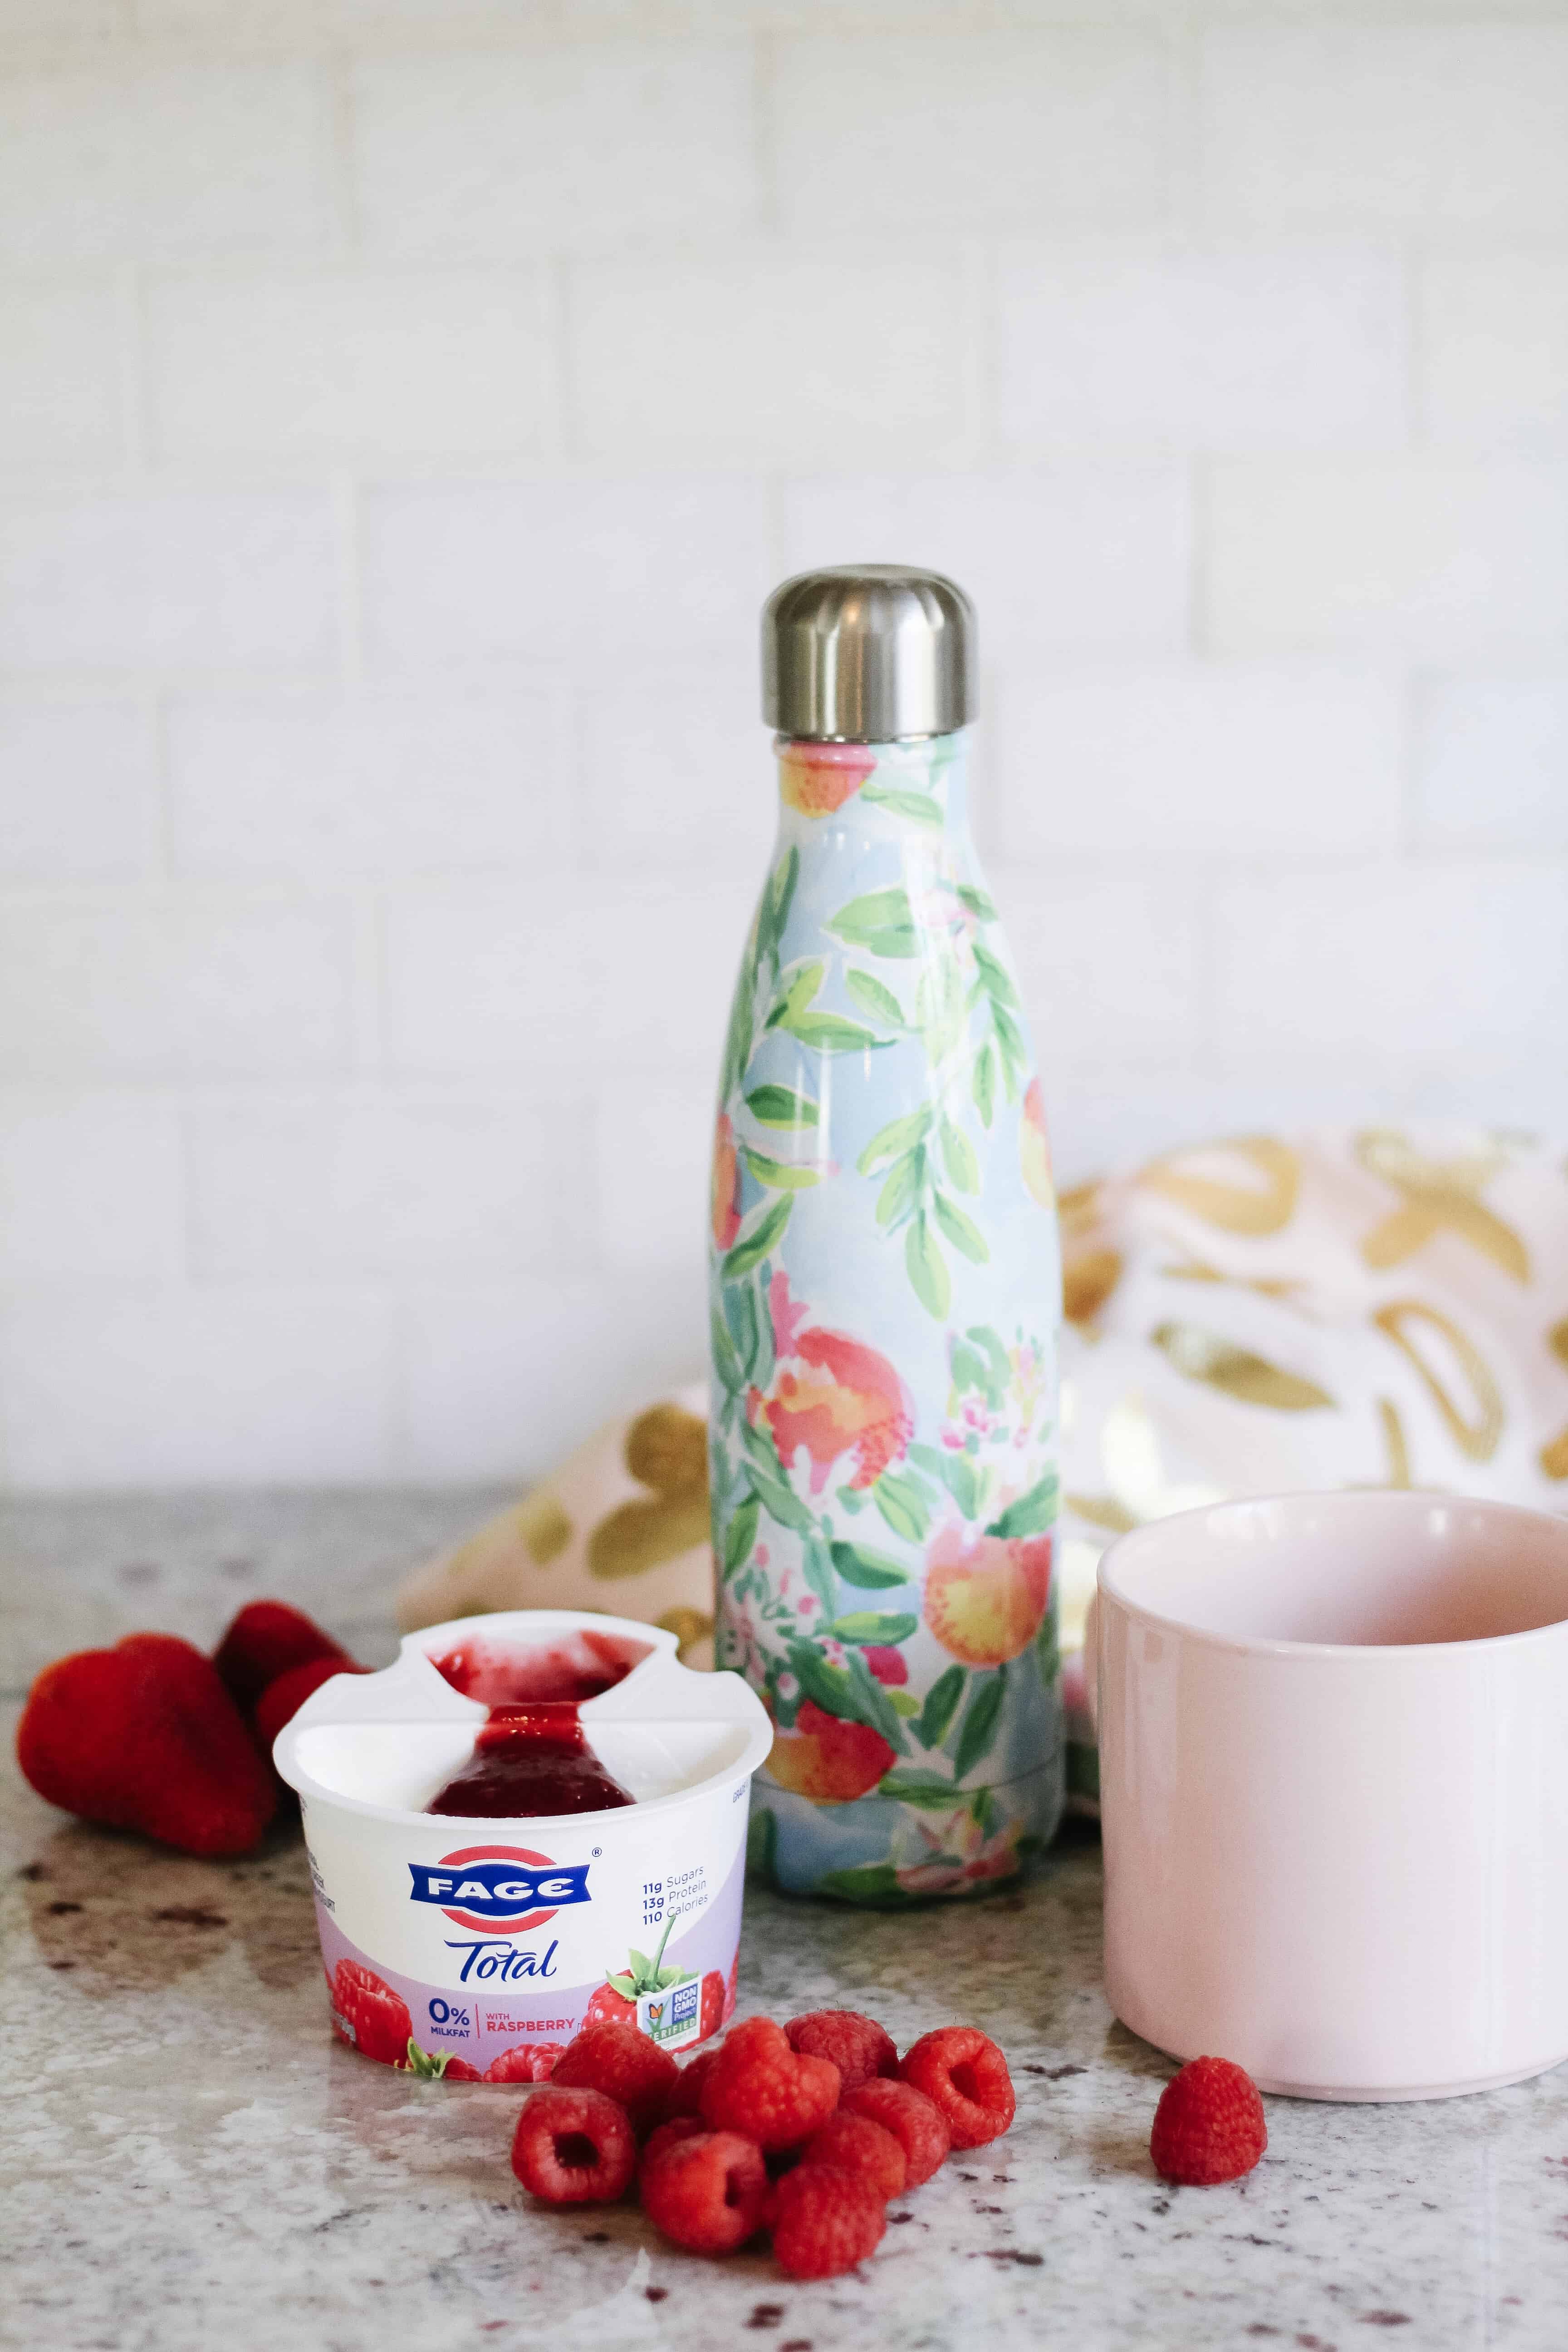 FAGE Total Split Cup with swell bottle and coffee cup